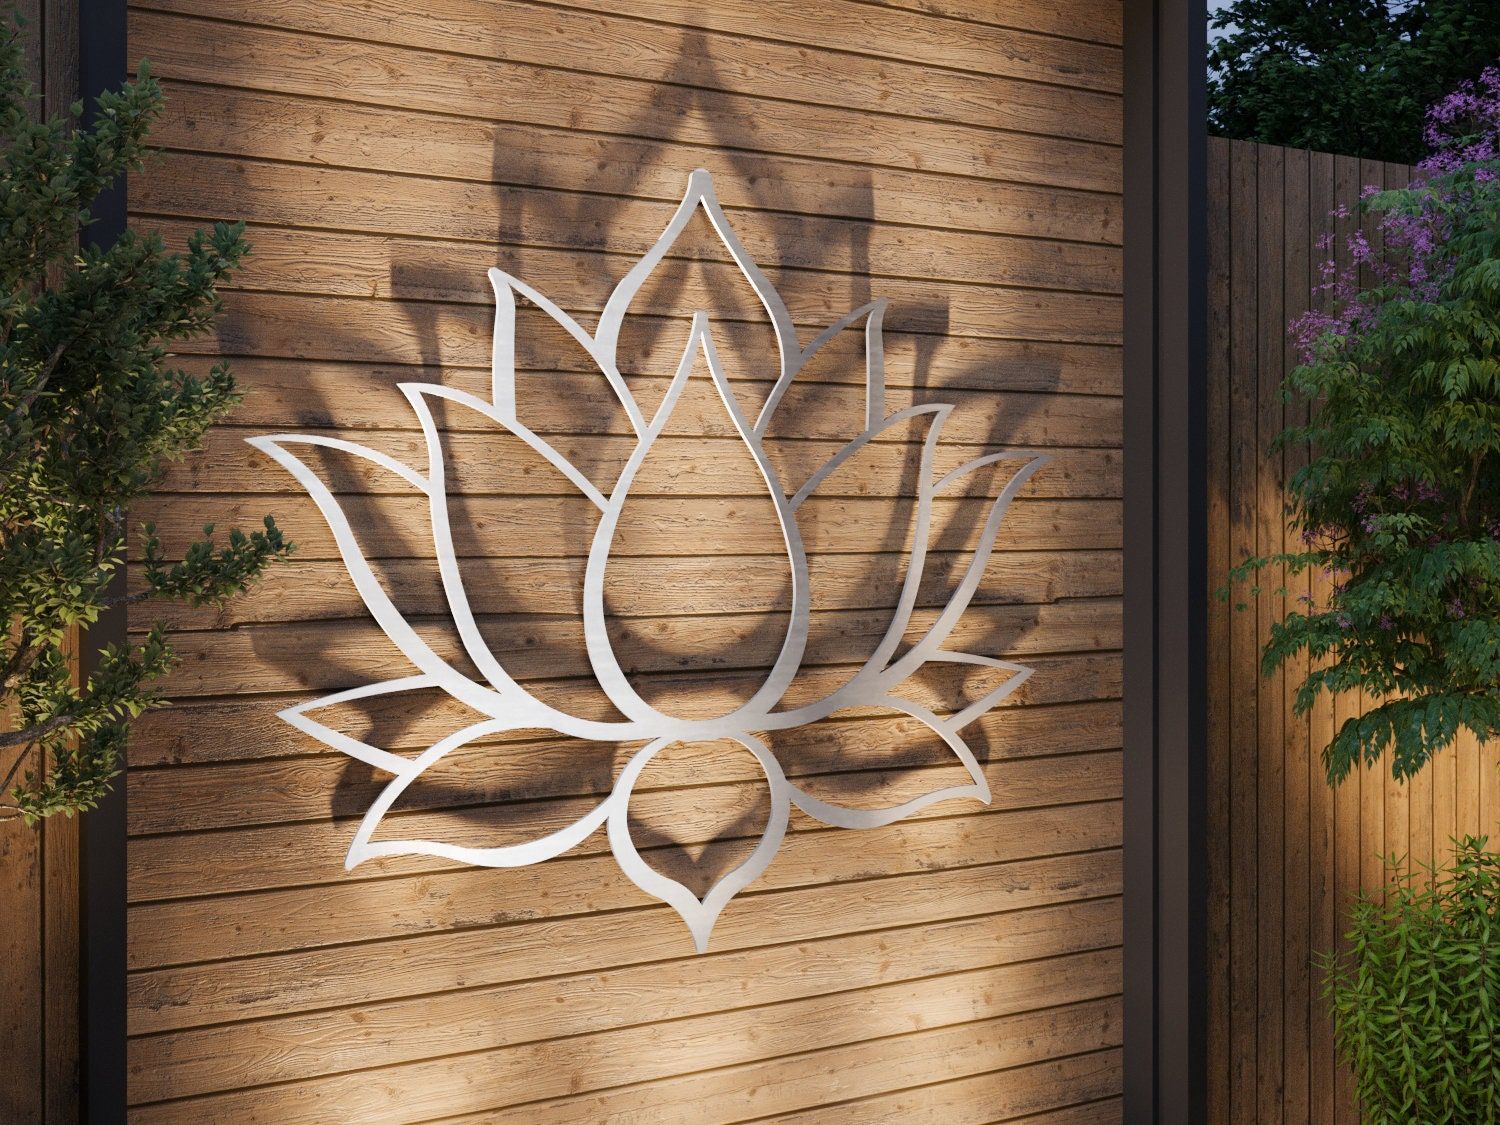 Lotus Flower Large Outdoor Metal Wall Art, Garden Within Landscape Wall Art (View 9 of 15)